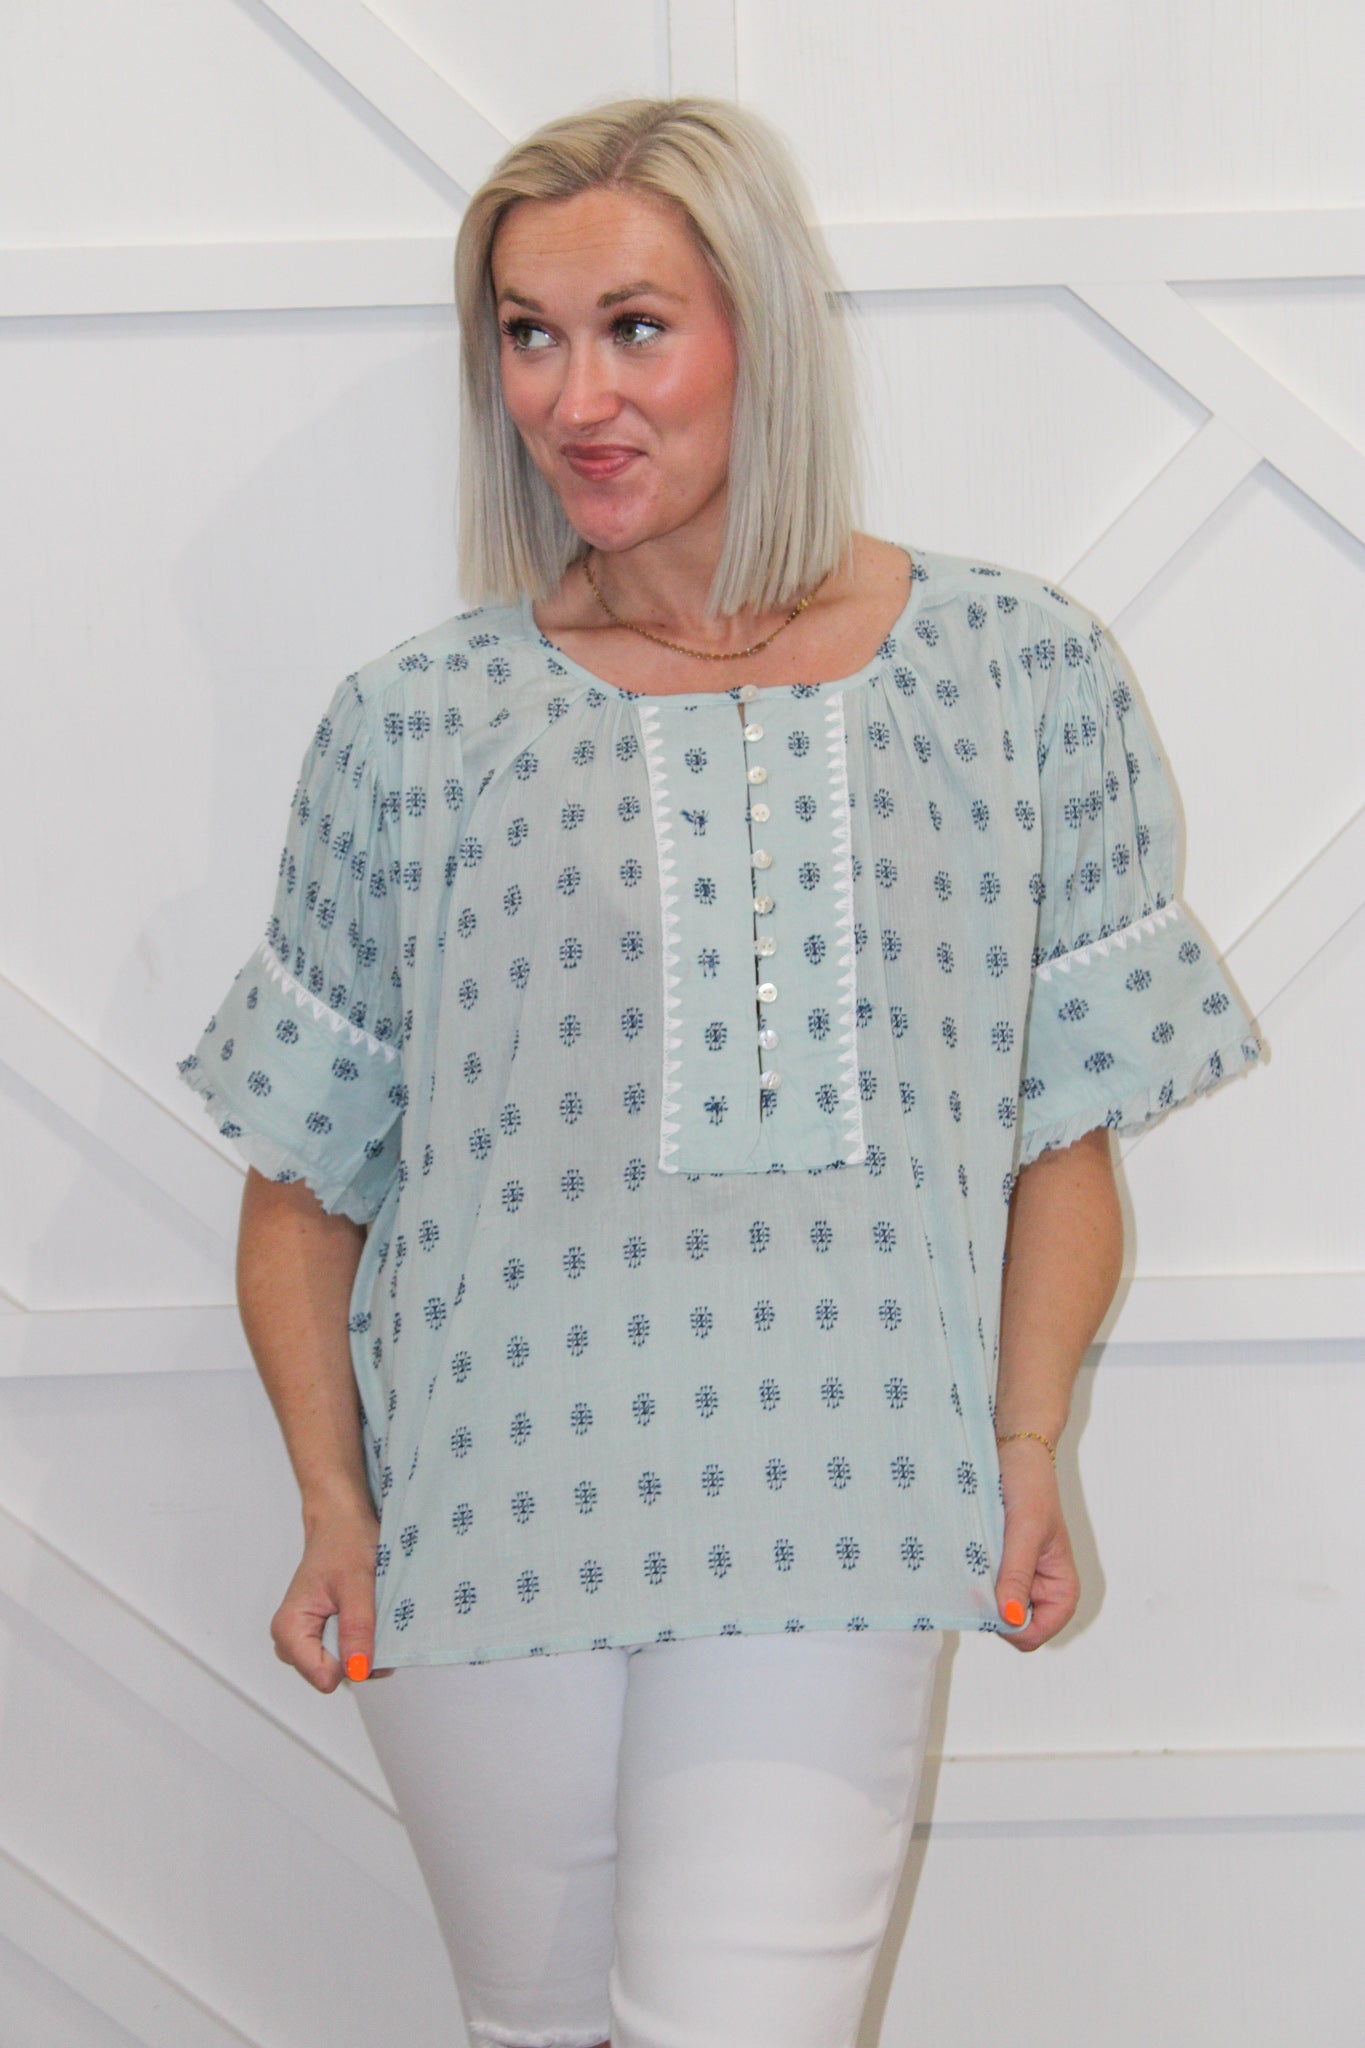 Stitched Up Popover Top